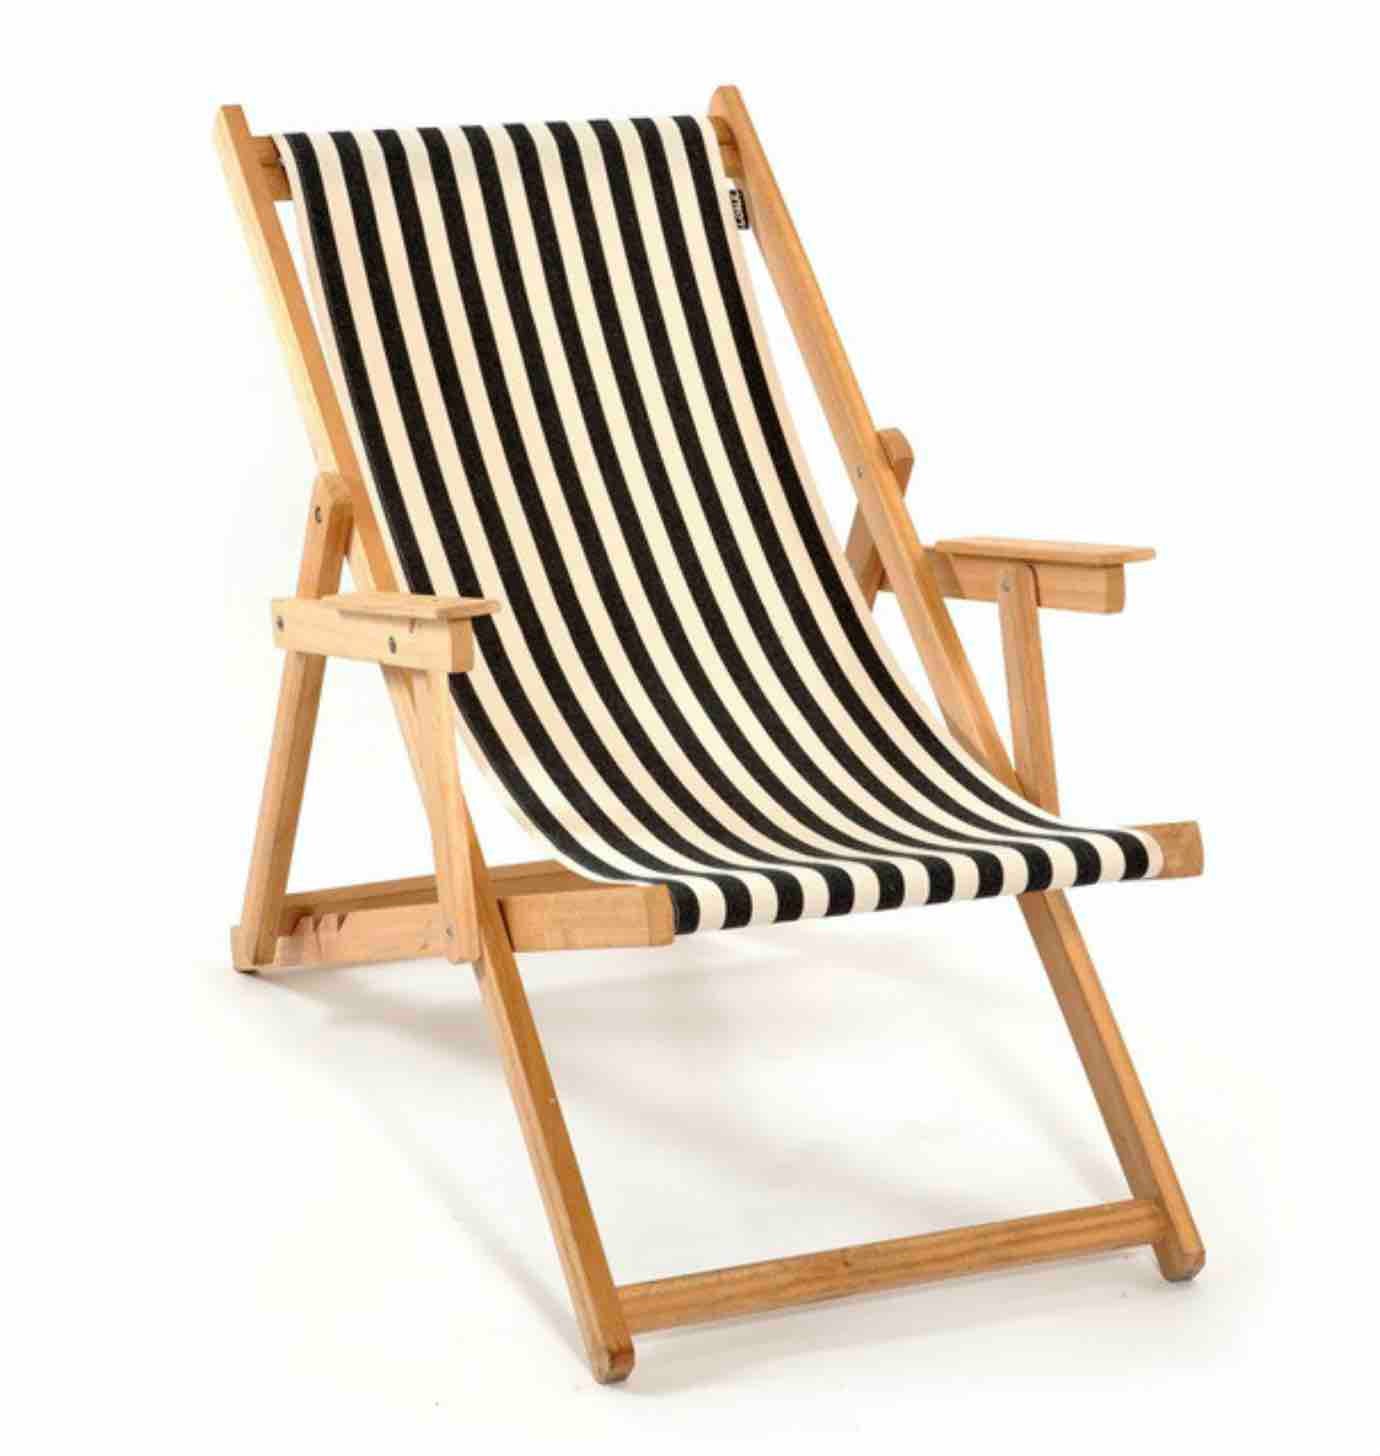 Deck chair with arms: black & white stripes